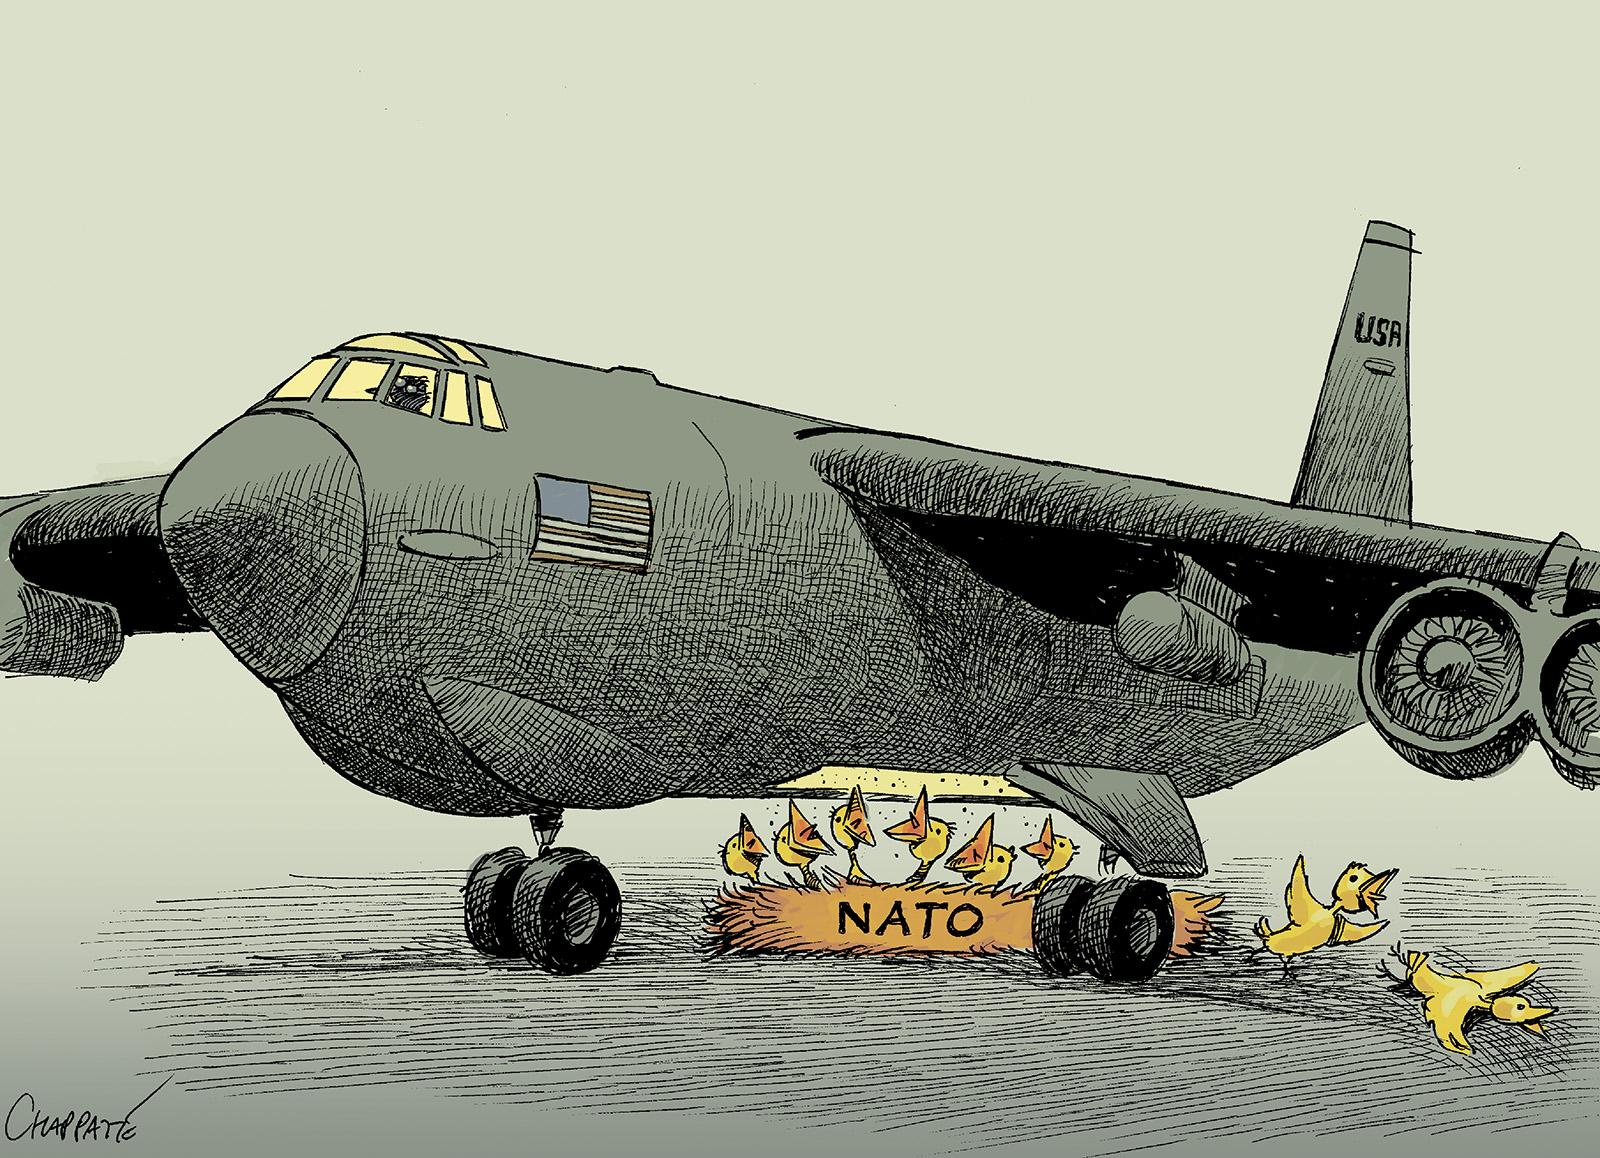 NATO, under the American wing